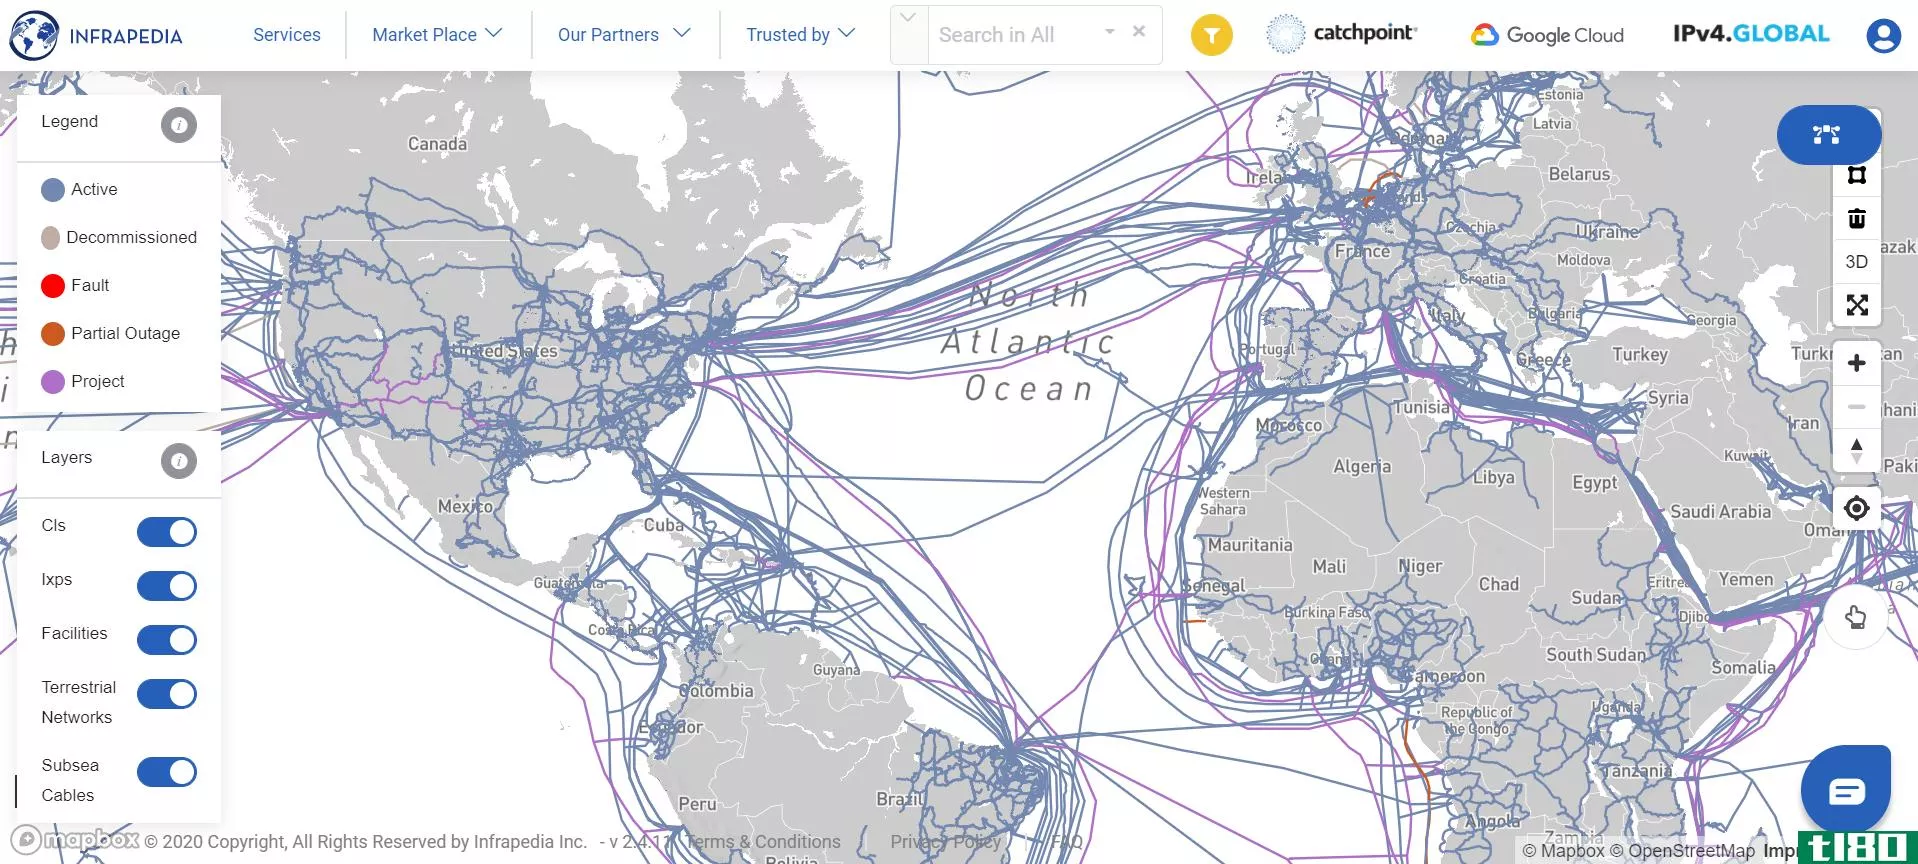 infrapedia cable map website